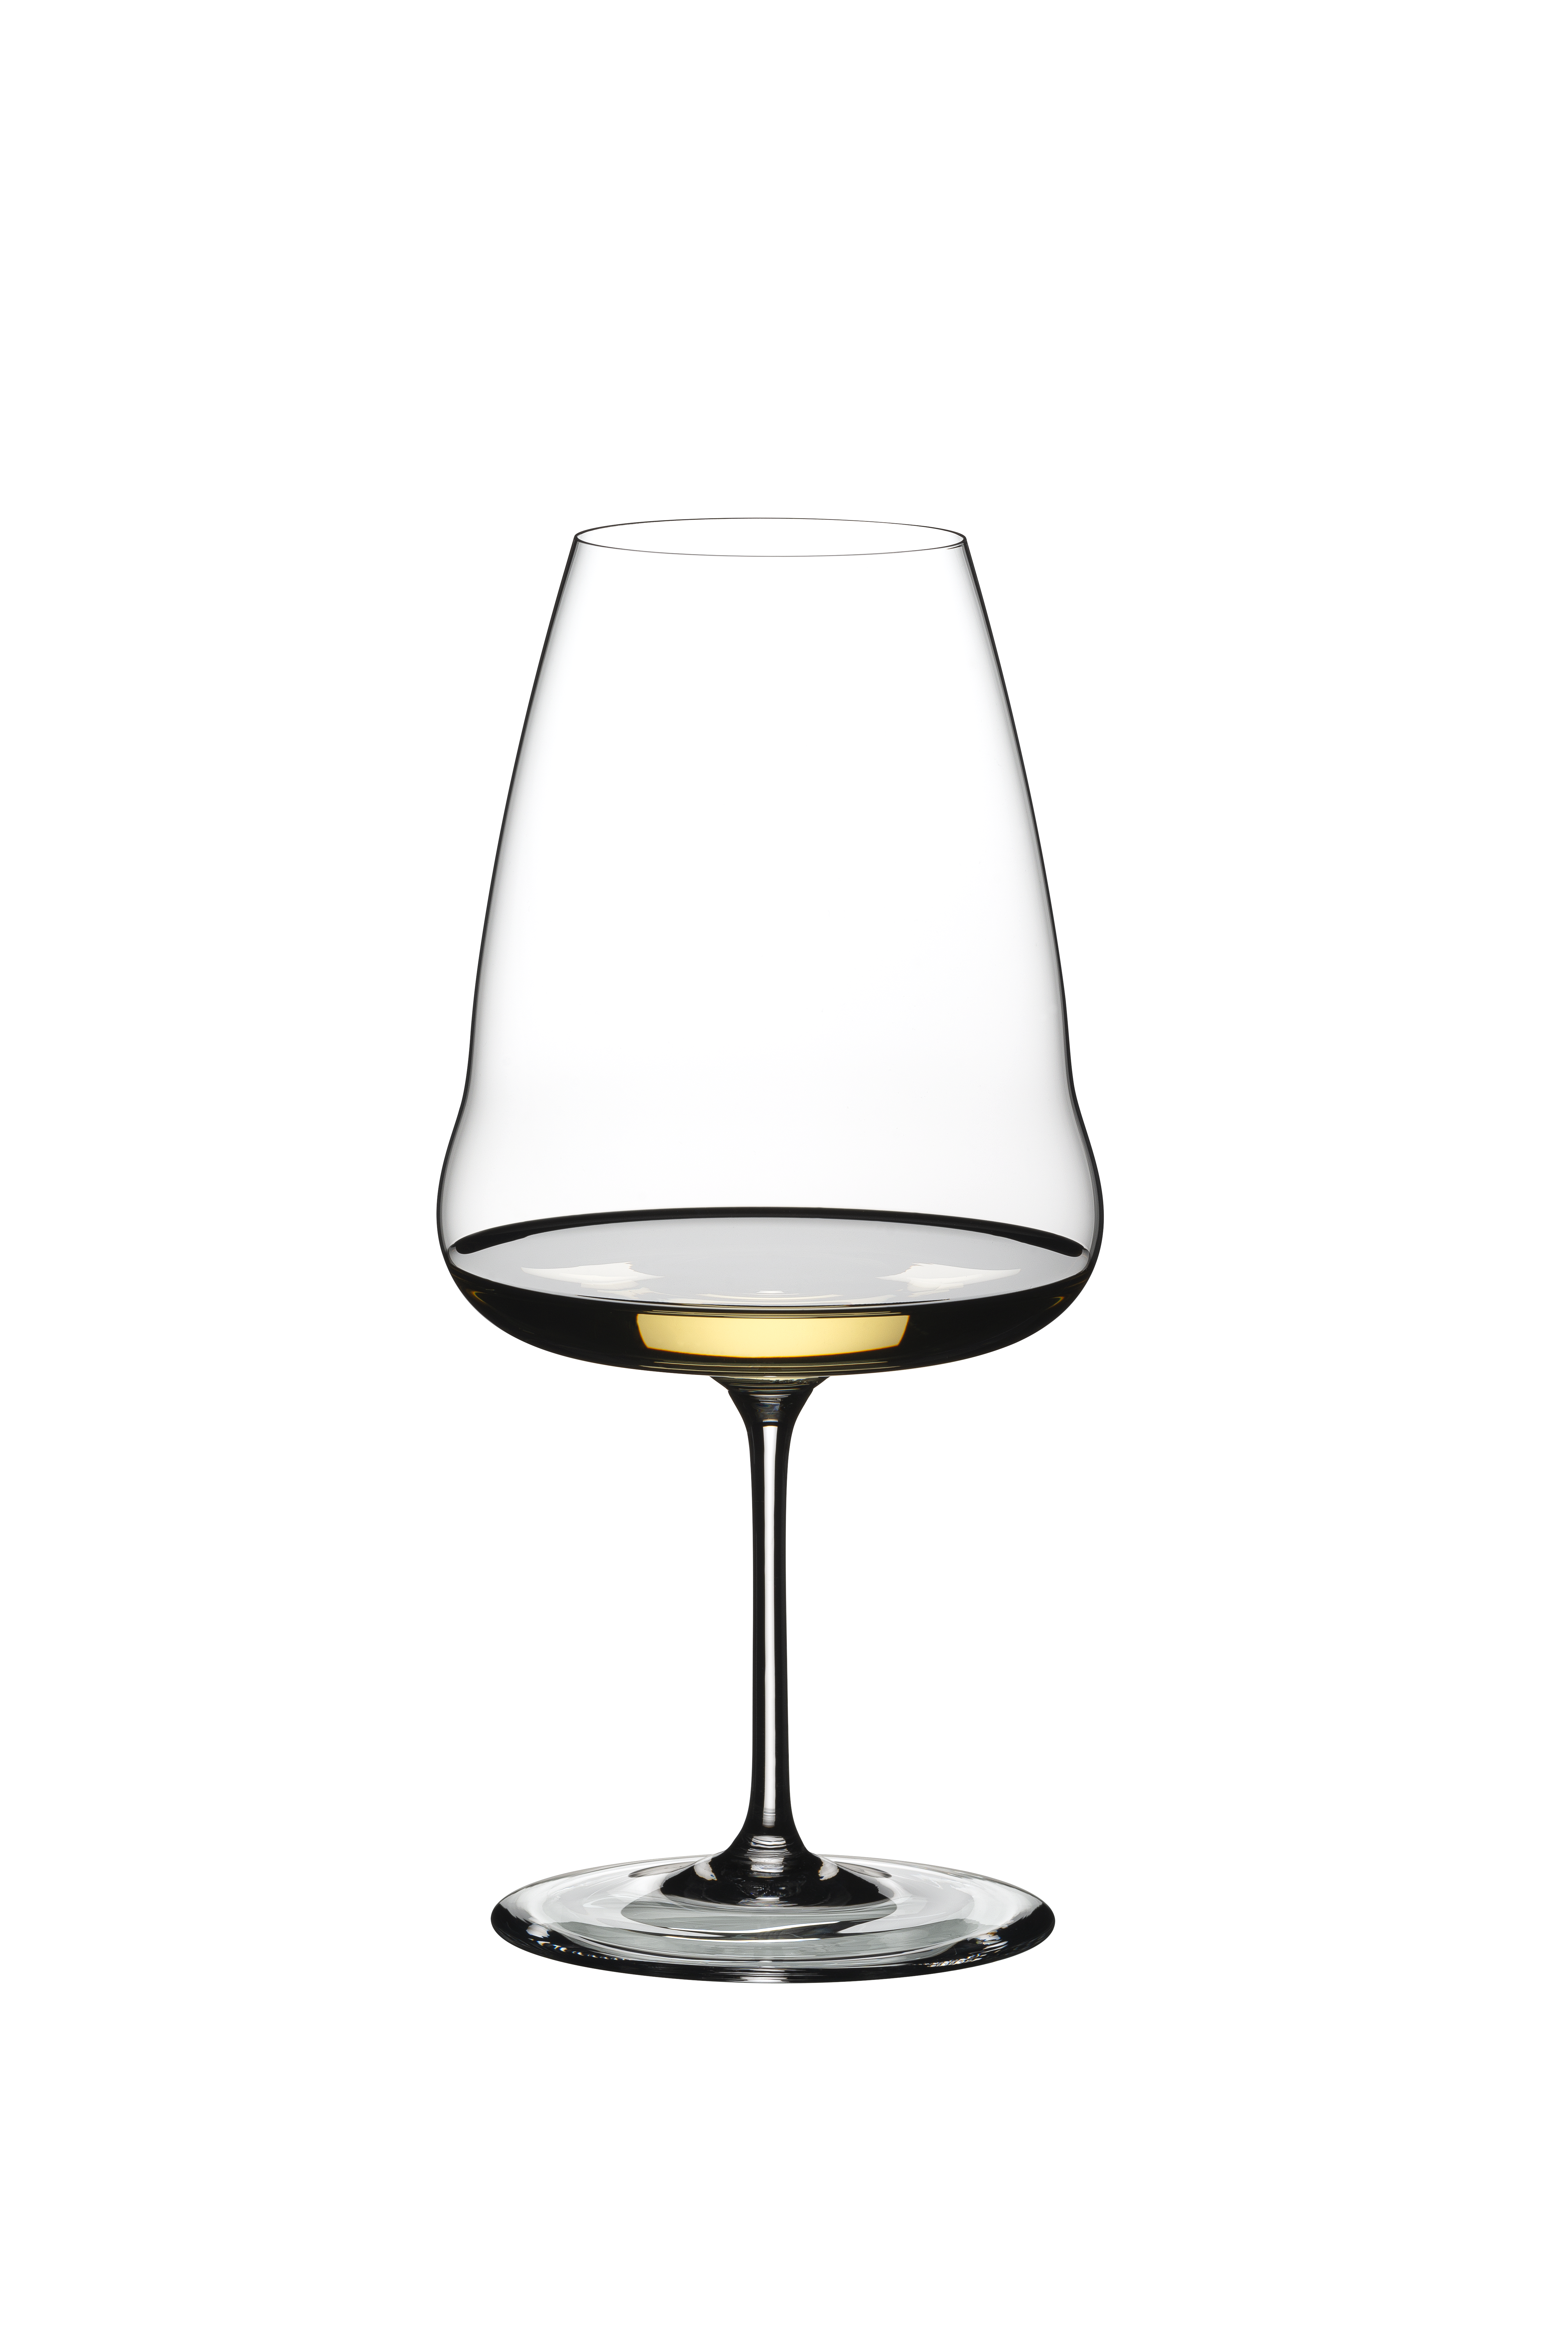 /globalassets/03-vintec/product-content/product-image/riedel/riesling_riedel-winewings_filled_white_1234-15.jpg